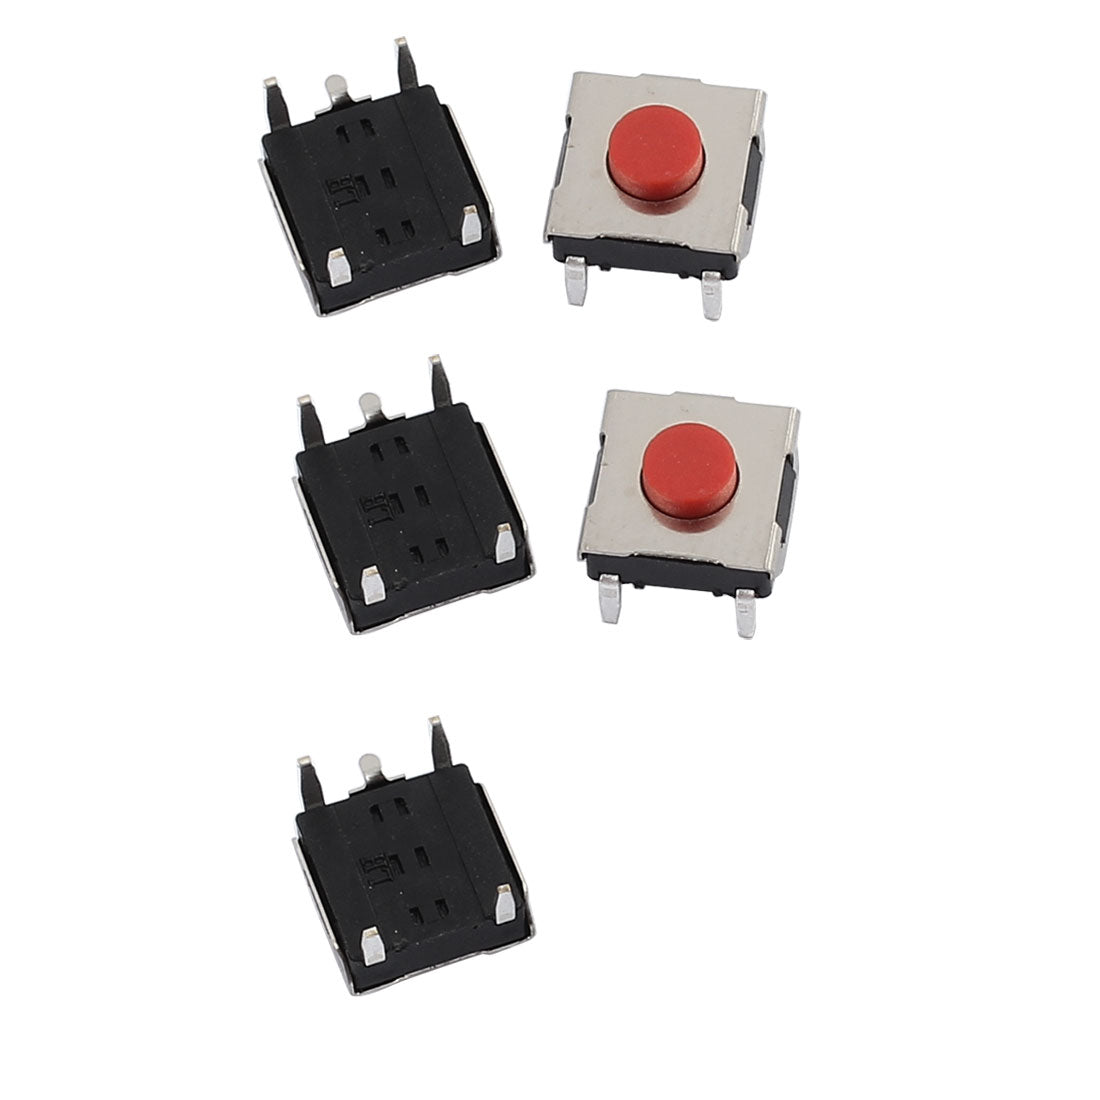 uxcell Uxcell 5Pcs 6mmx6mmx3.1mm Panel PCB Momentary Tactile Tact Push Button Switch 4 Terminals